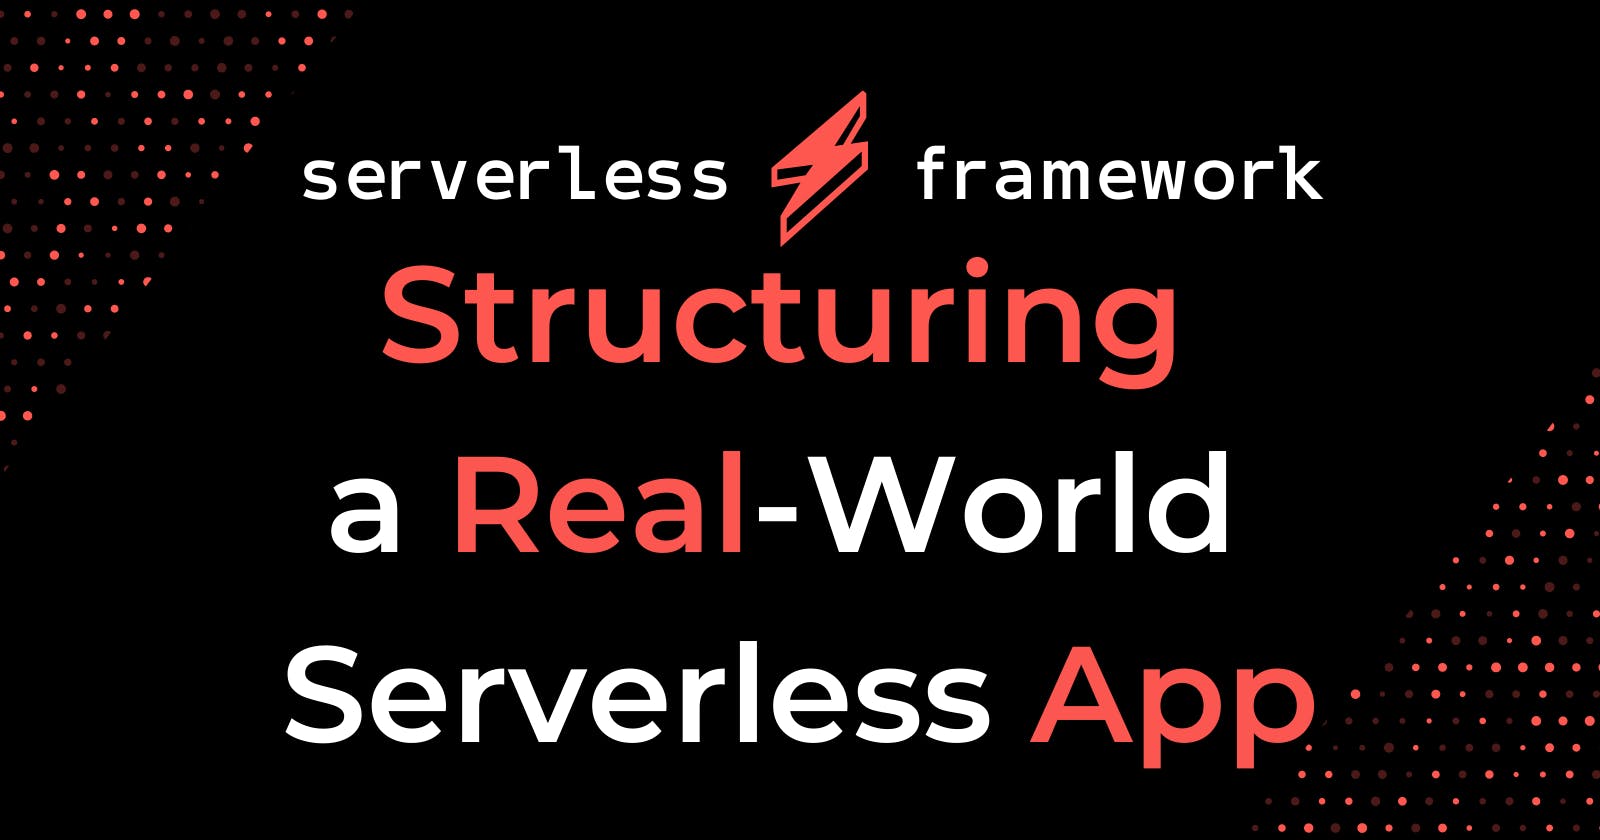 Structuring a Real-World Serverless App